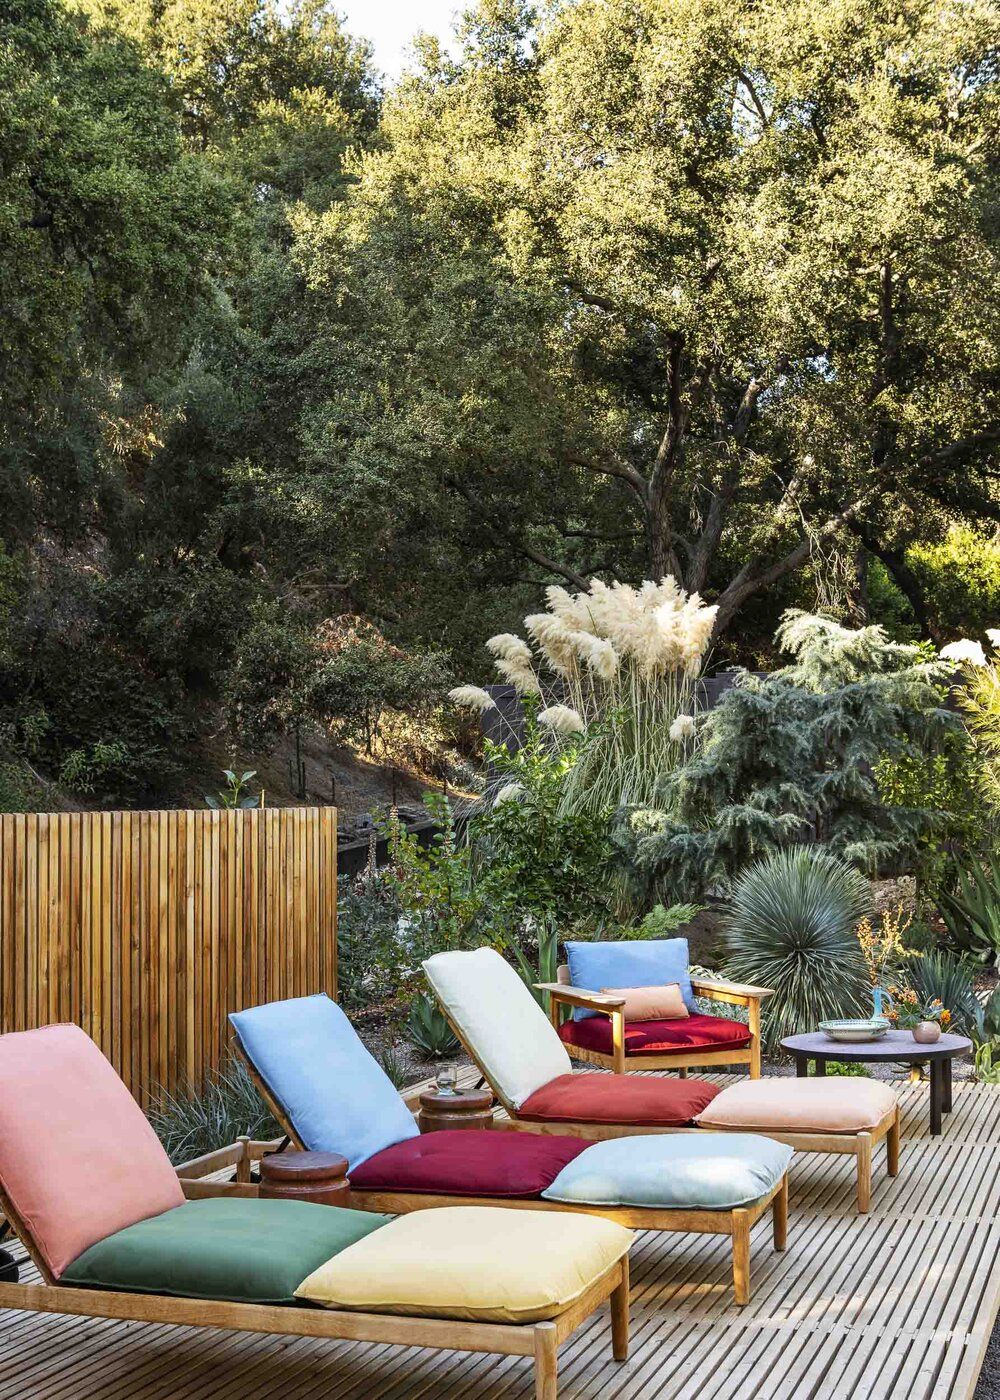 Top Picks: Outdoor Furniture Sets for
Stylish Outdoor Living